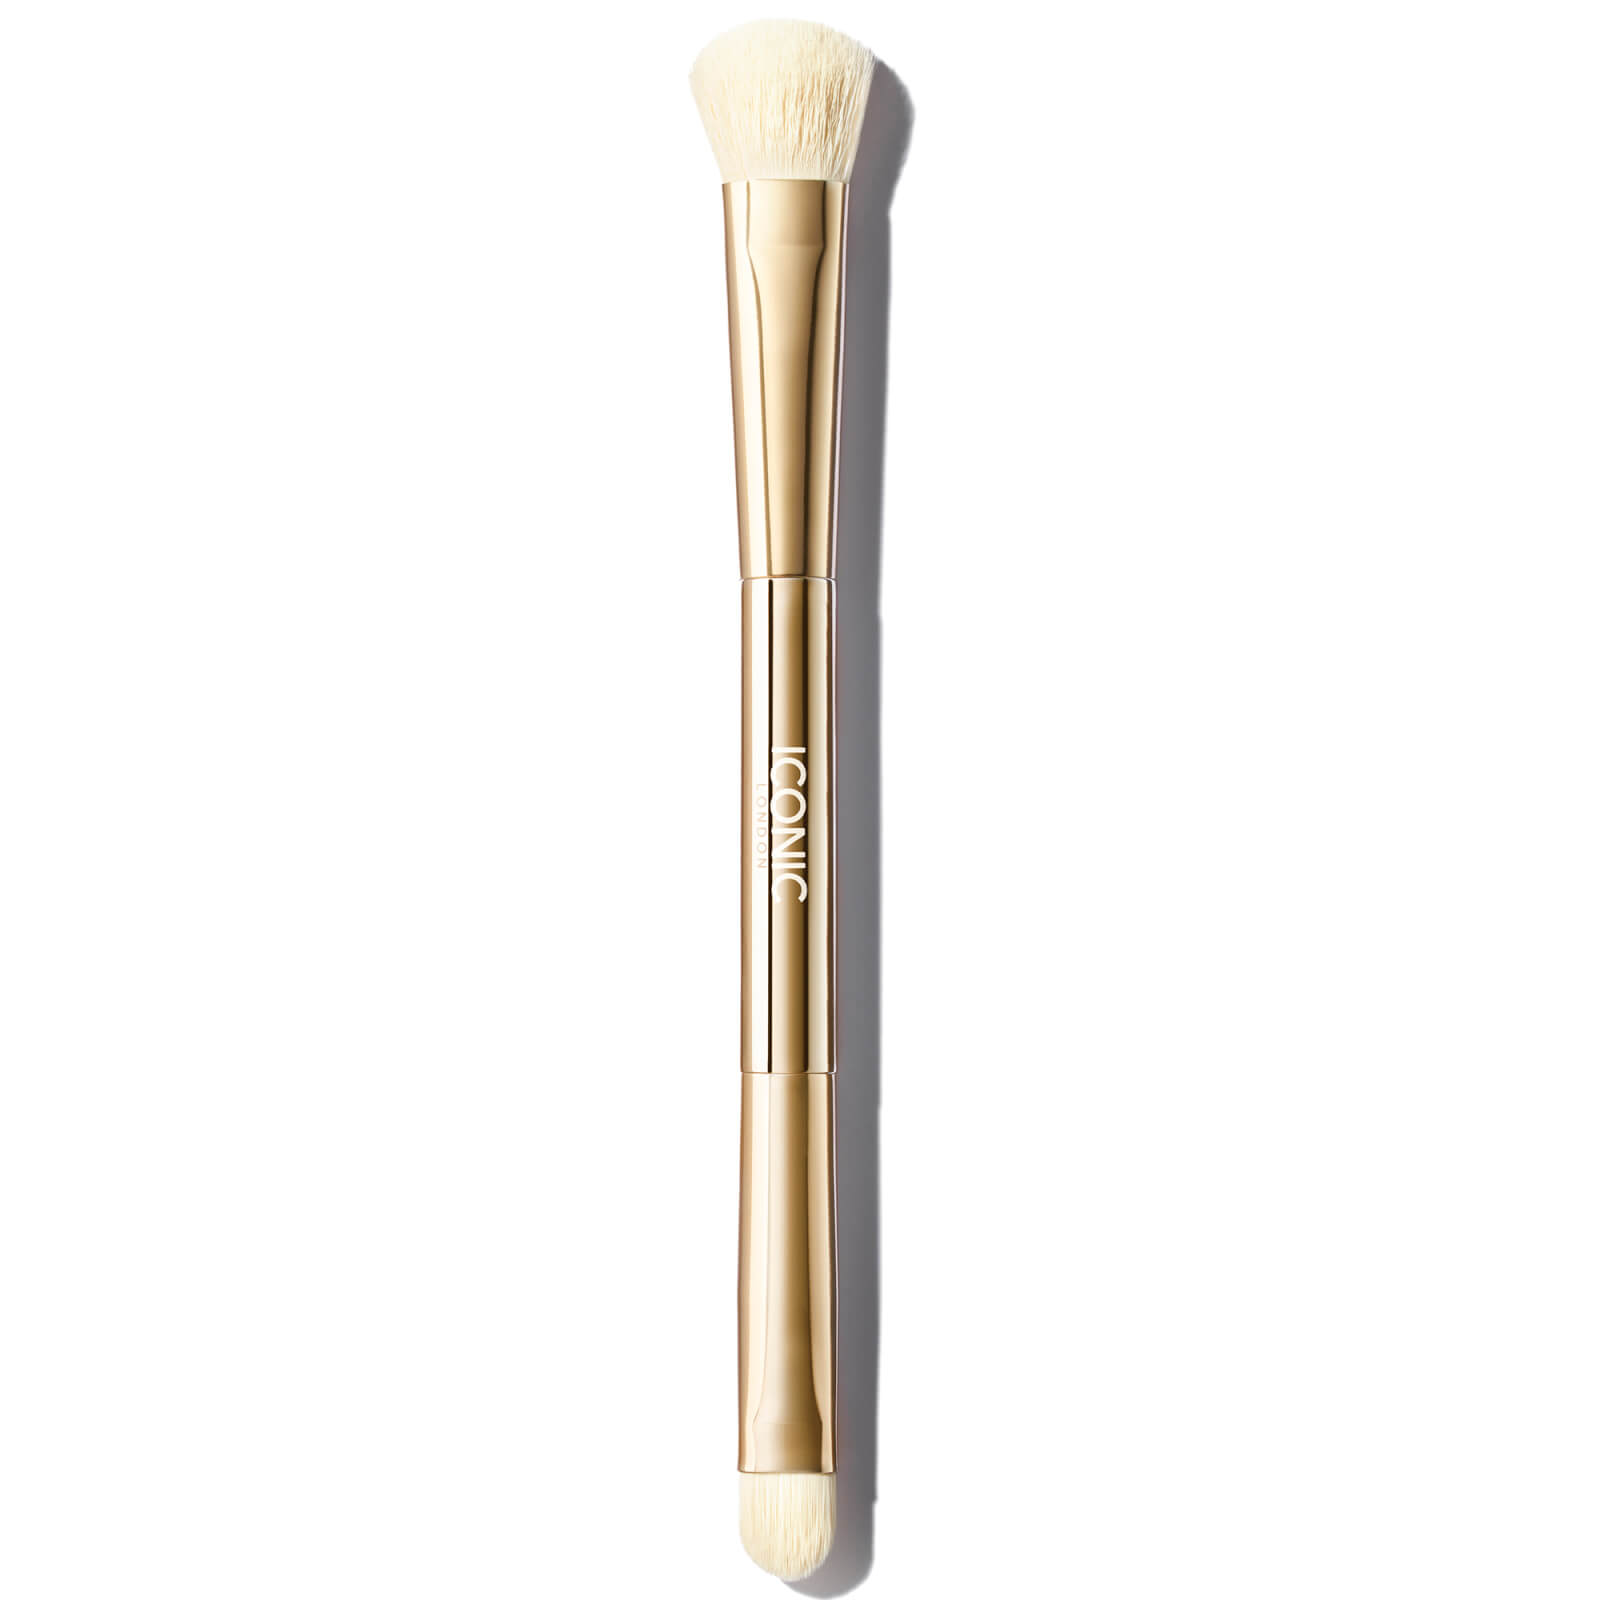 Shop Iconic London Concealer Duo Brush